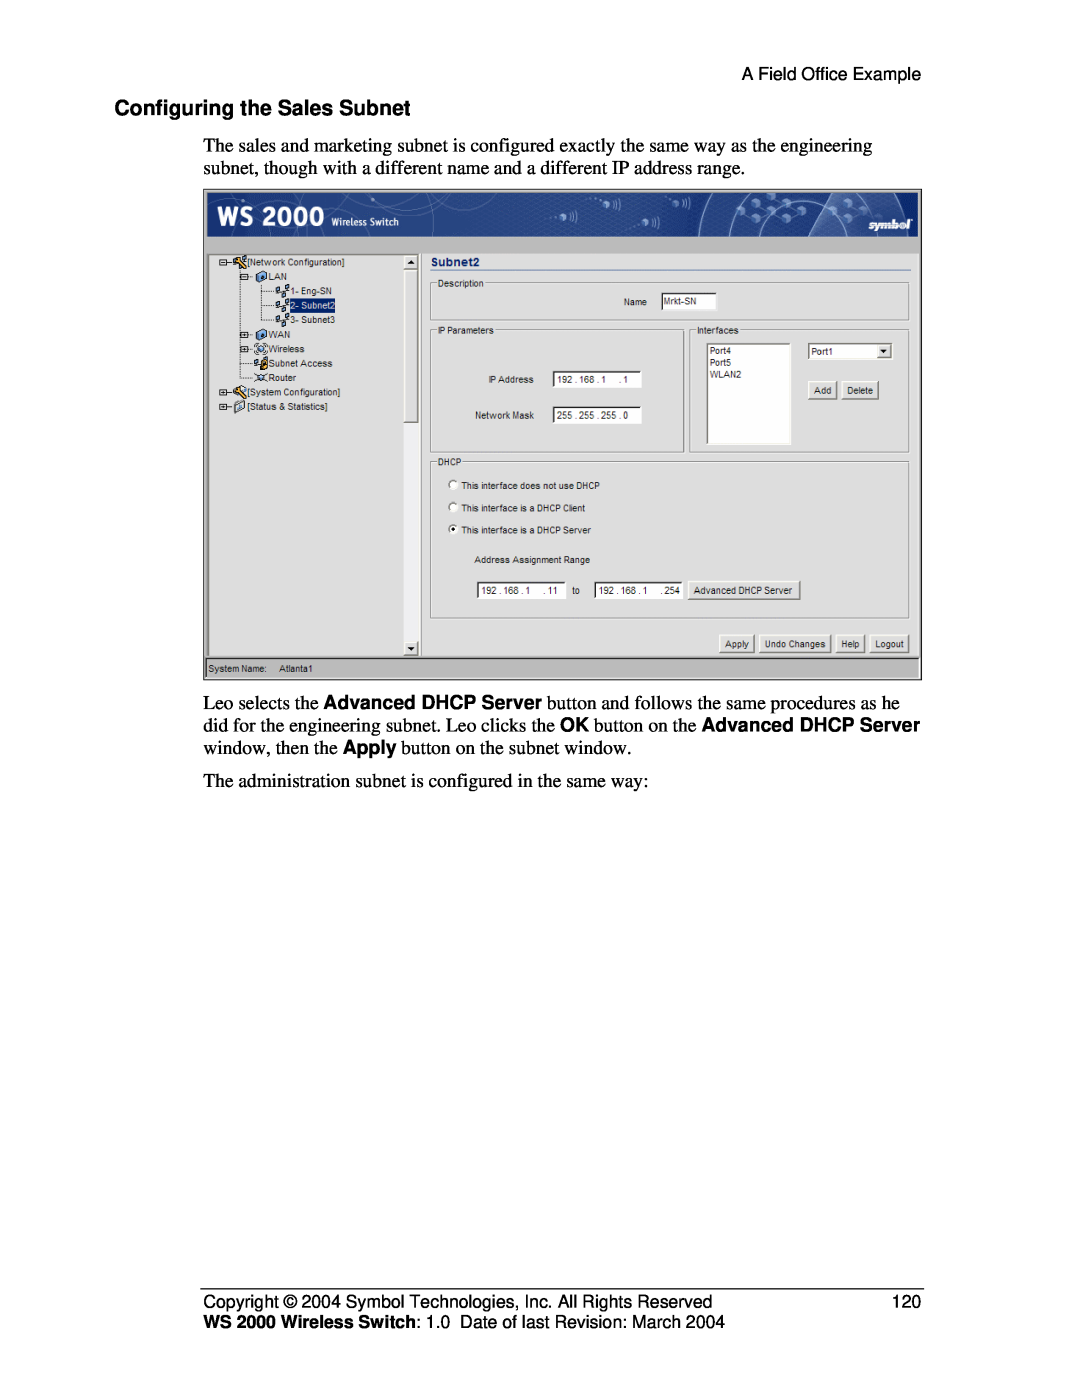 Symbol Technologies WS 2000 manual Configuring the Sales Subnet 